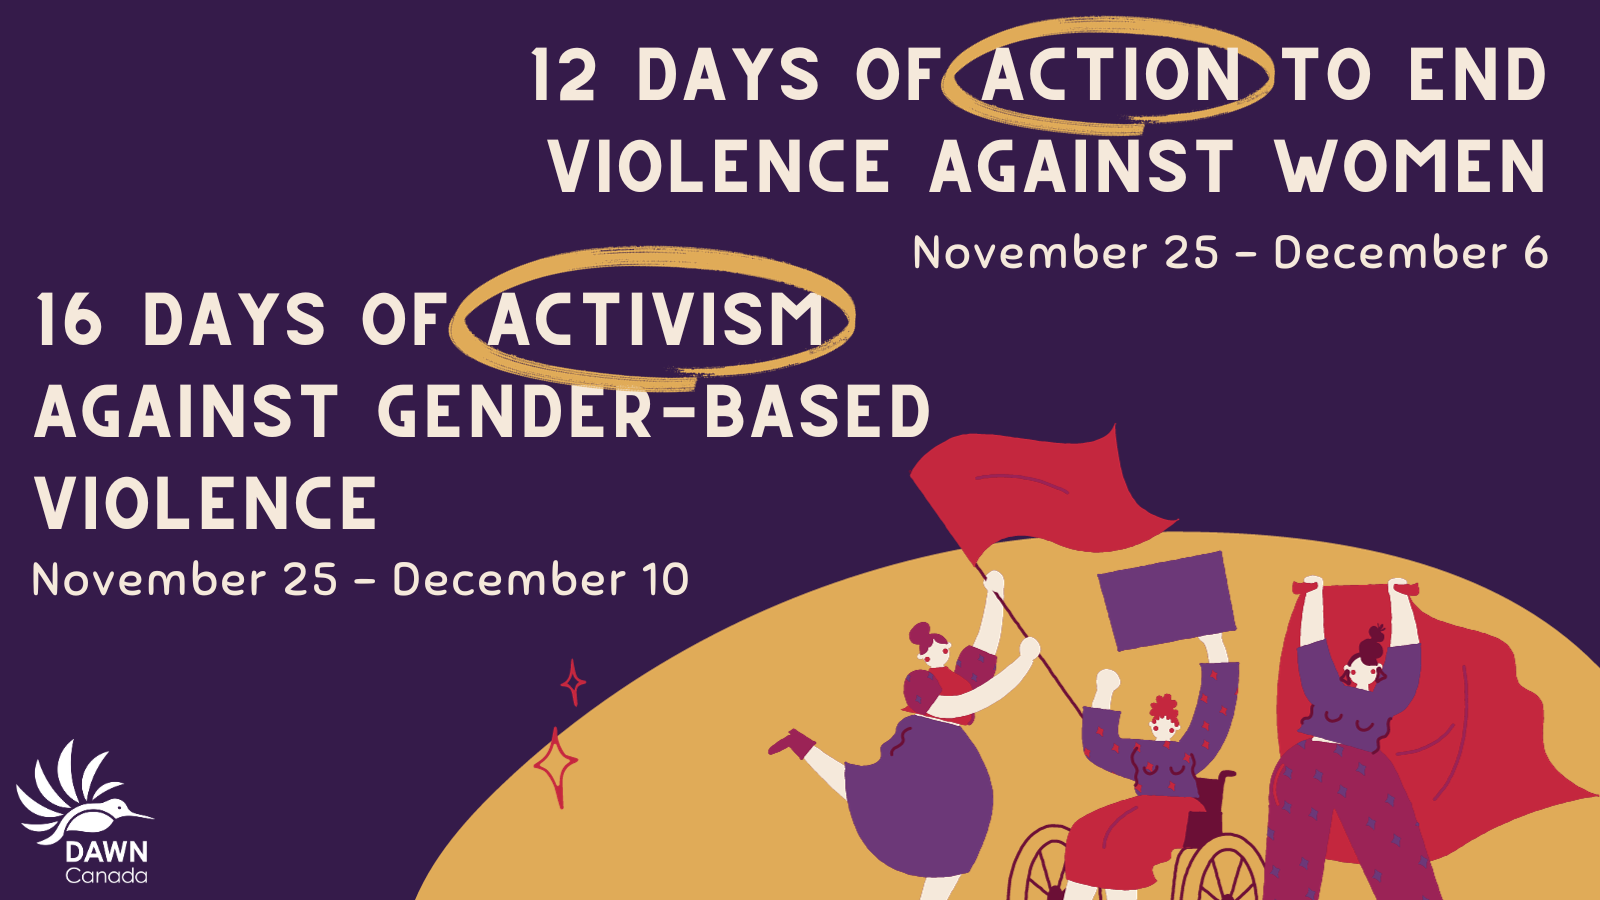 12 DAYS OF ACTION